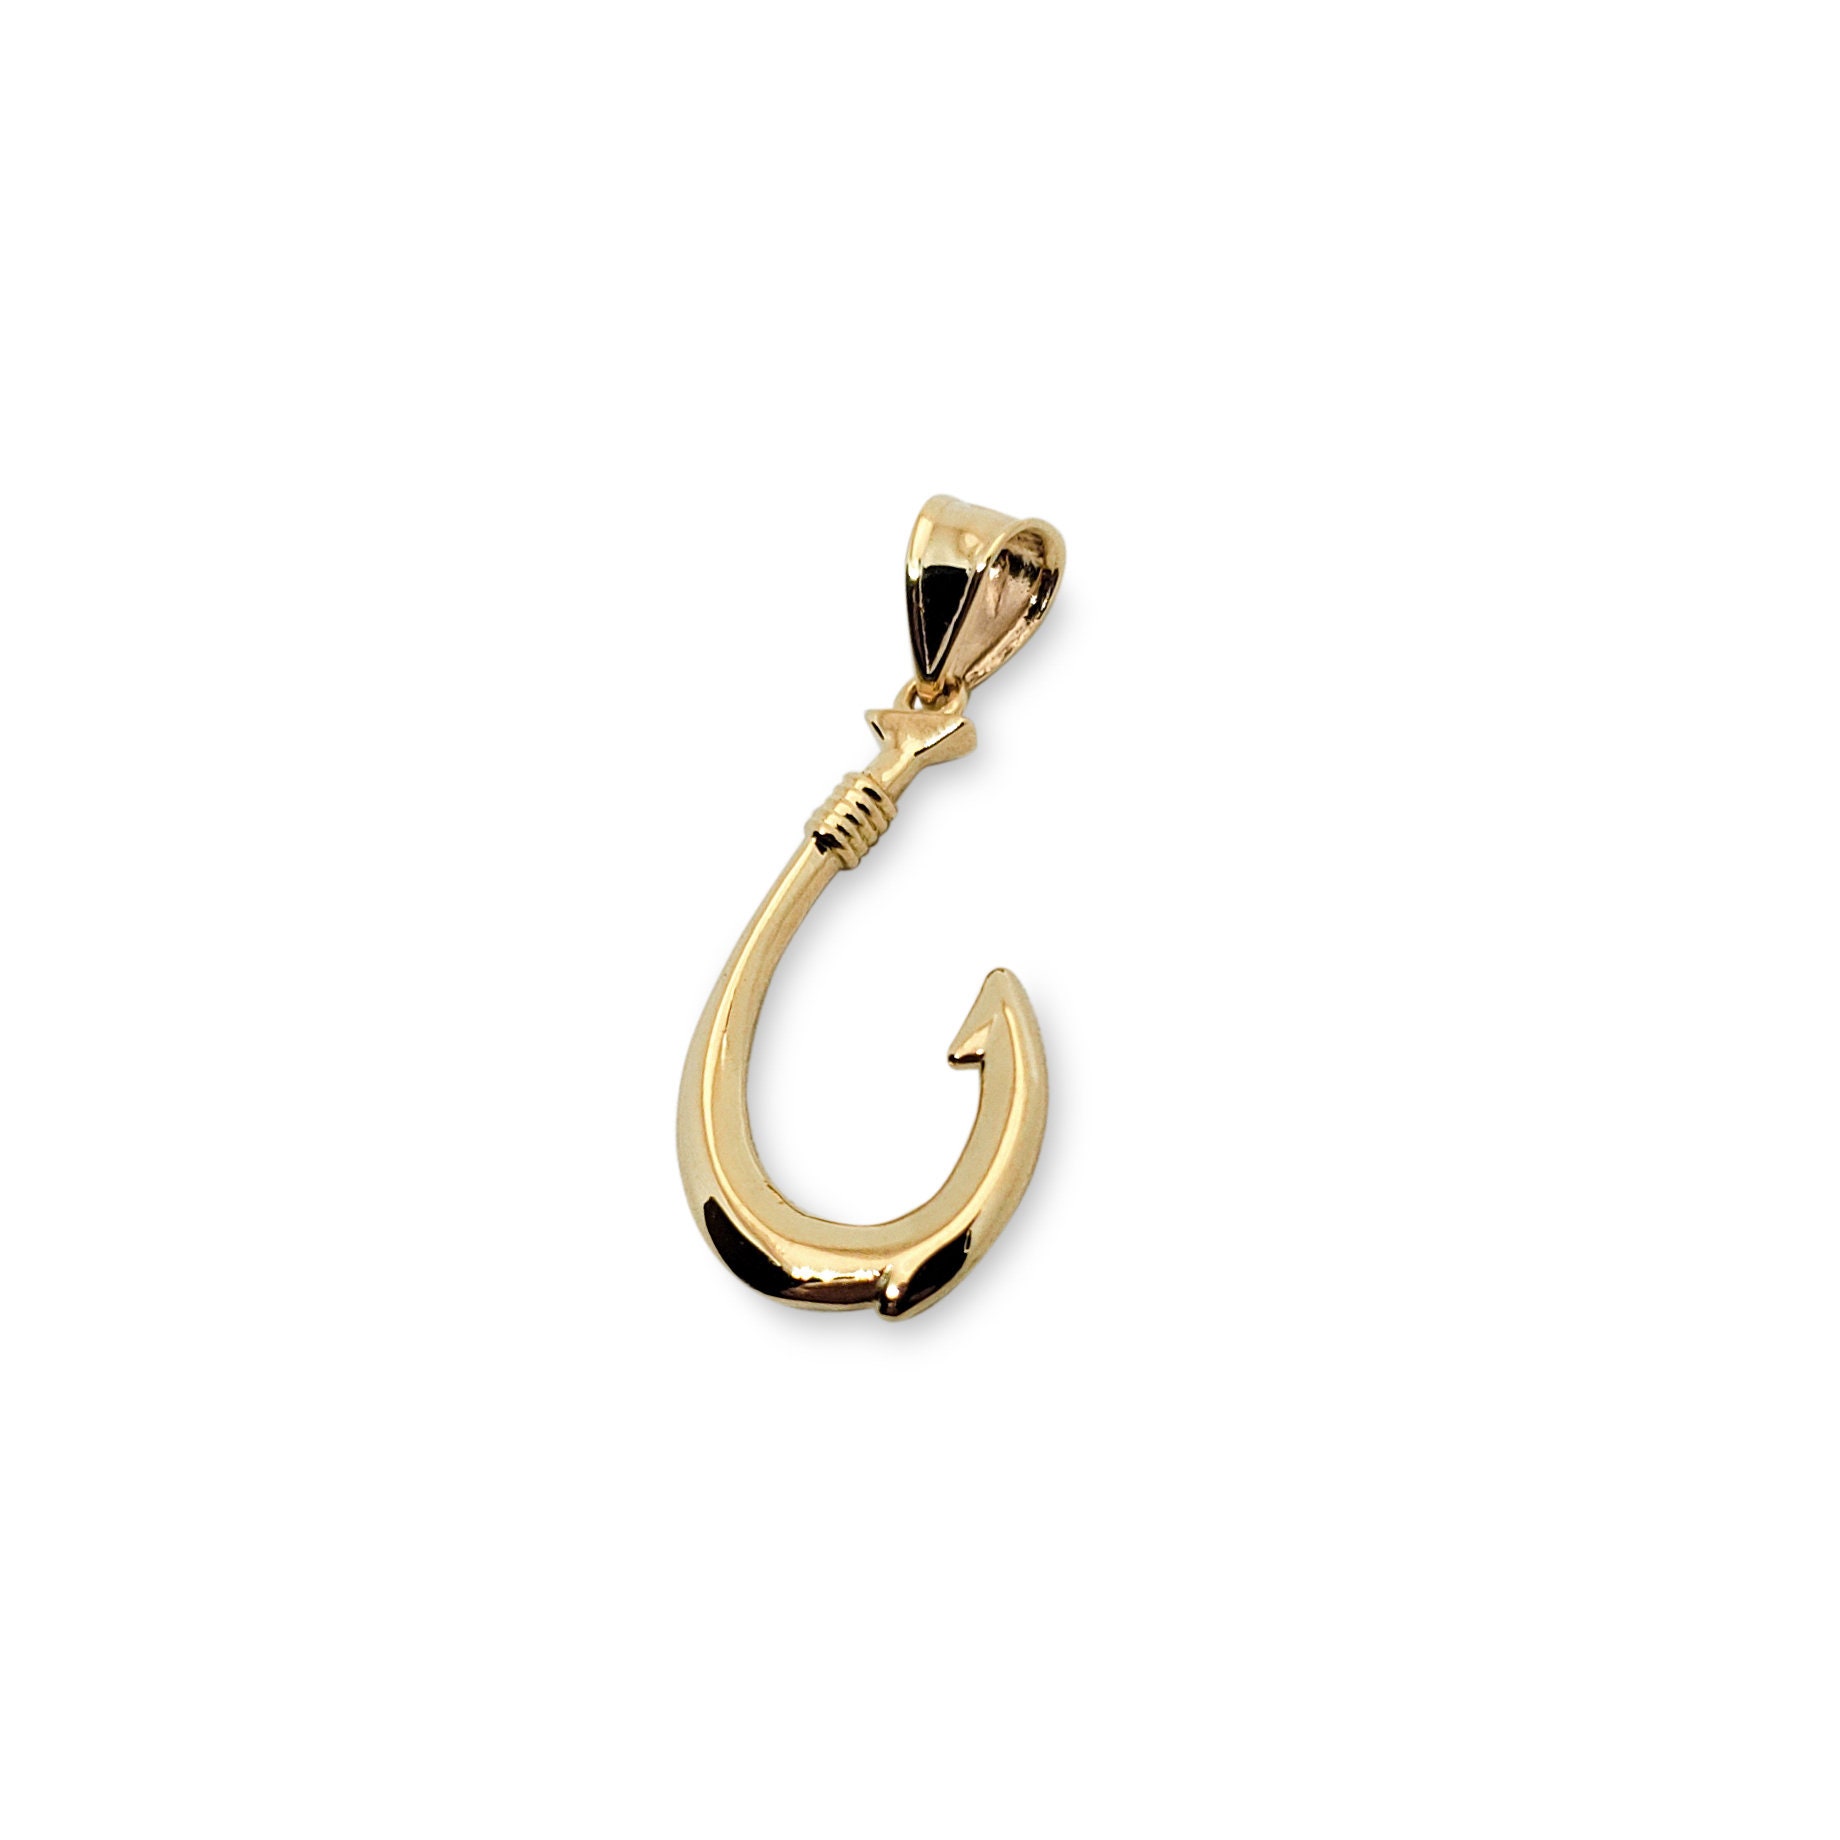 Buy Solid 18K Yellow White or Rose Gold Fish Hook Pendant, 1 1/16 Long, 1.7  Grams, Hawaiian Online in India 